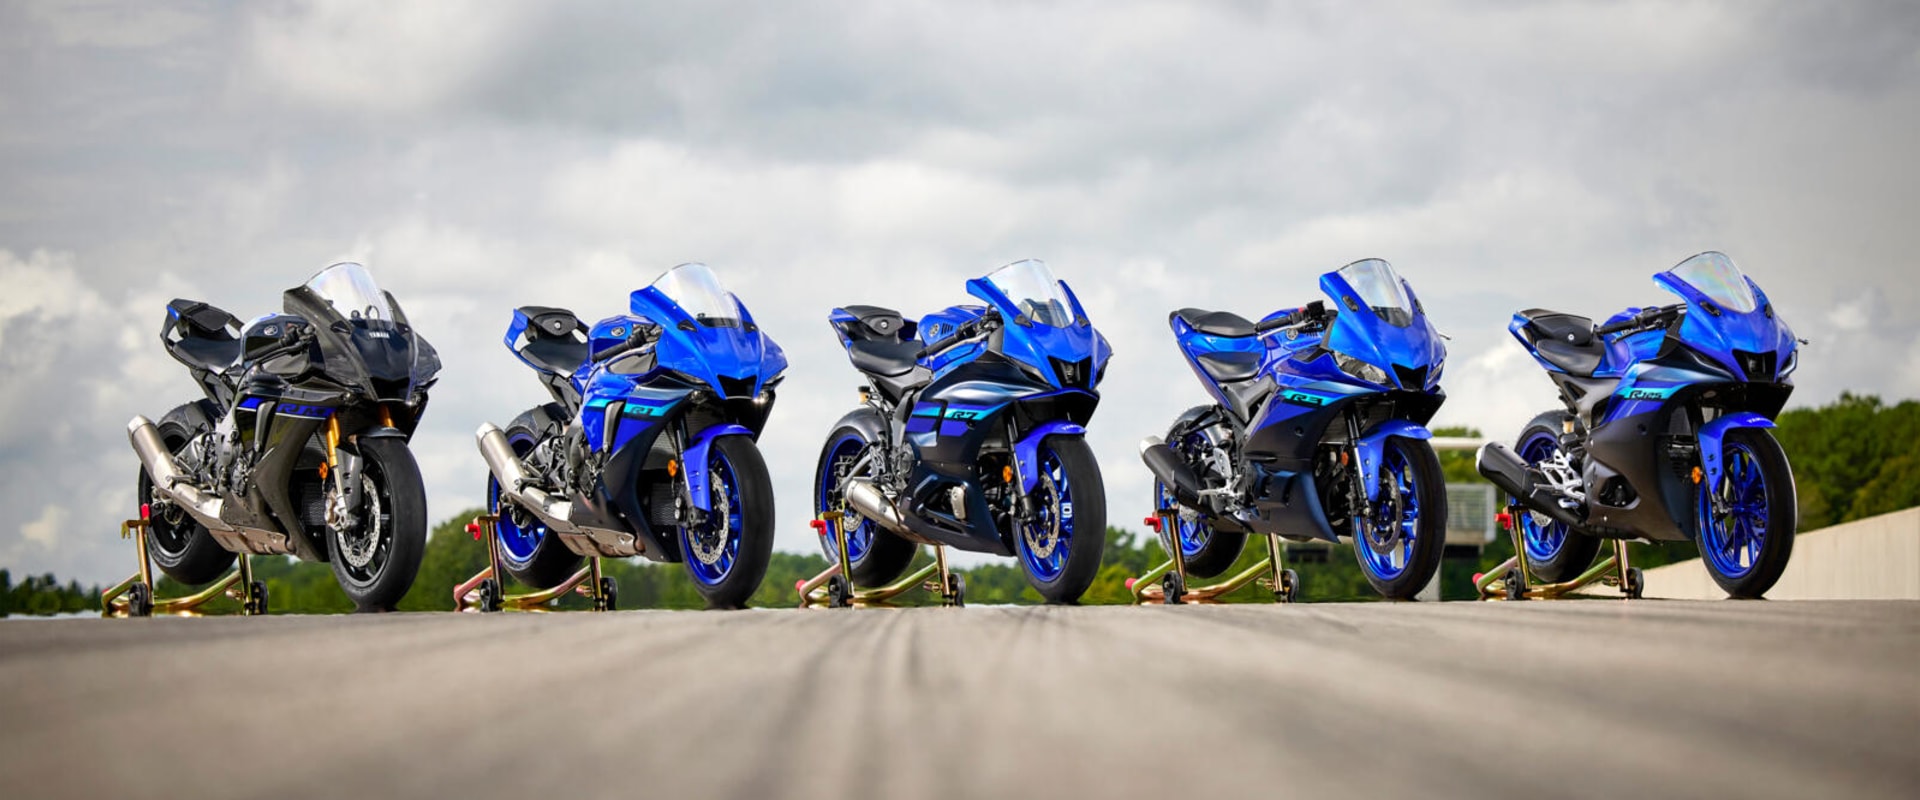 Racing and Competition News: All You Need to Know About the Motorcycle Lifestyle